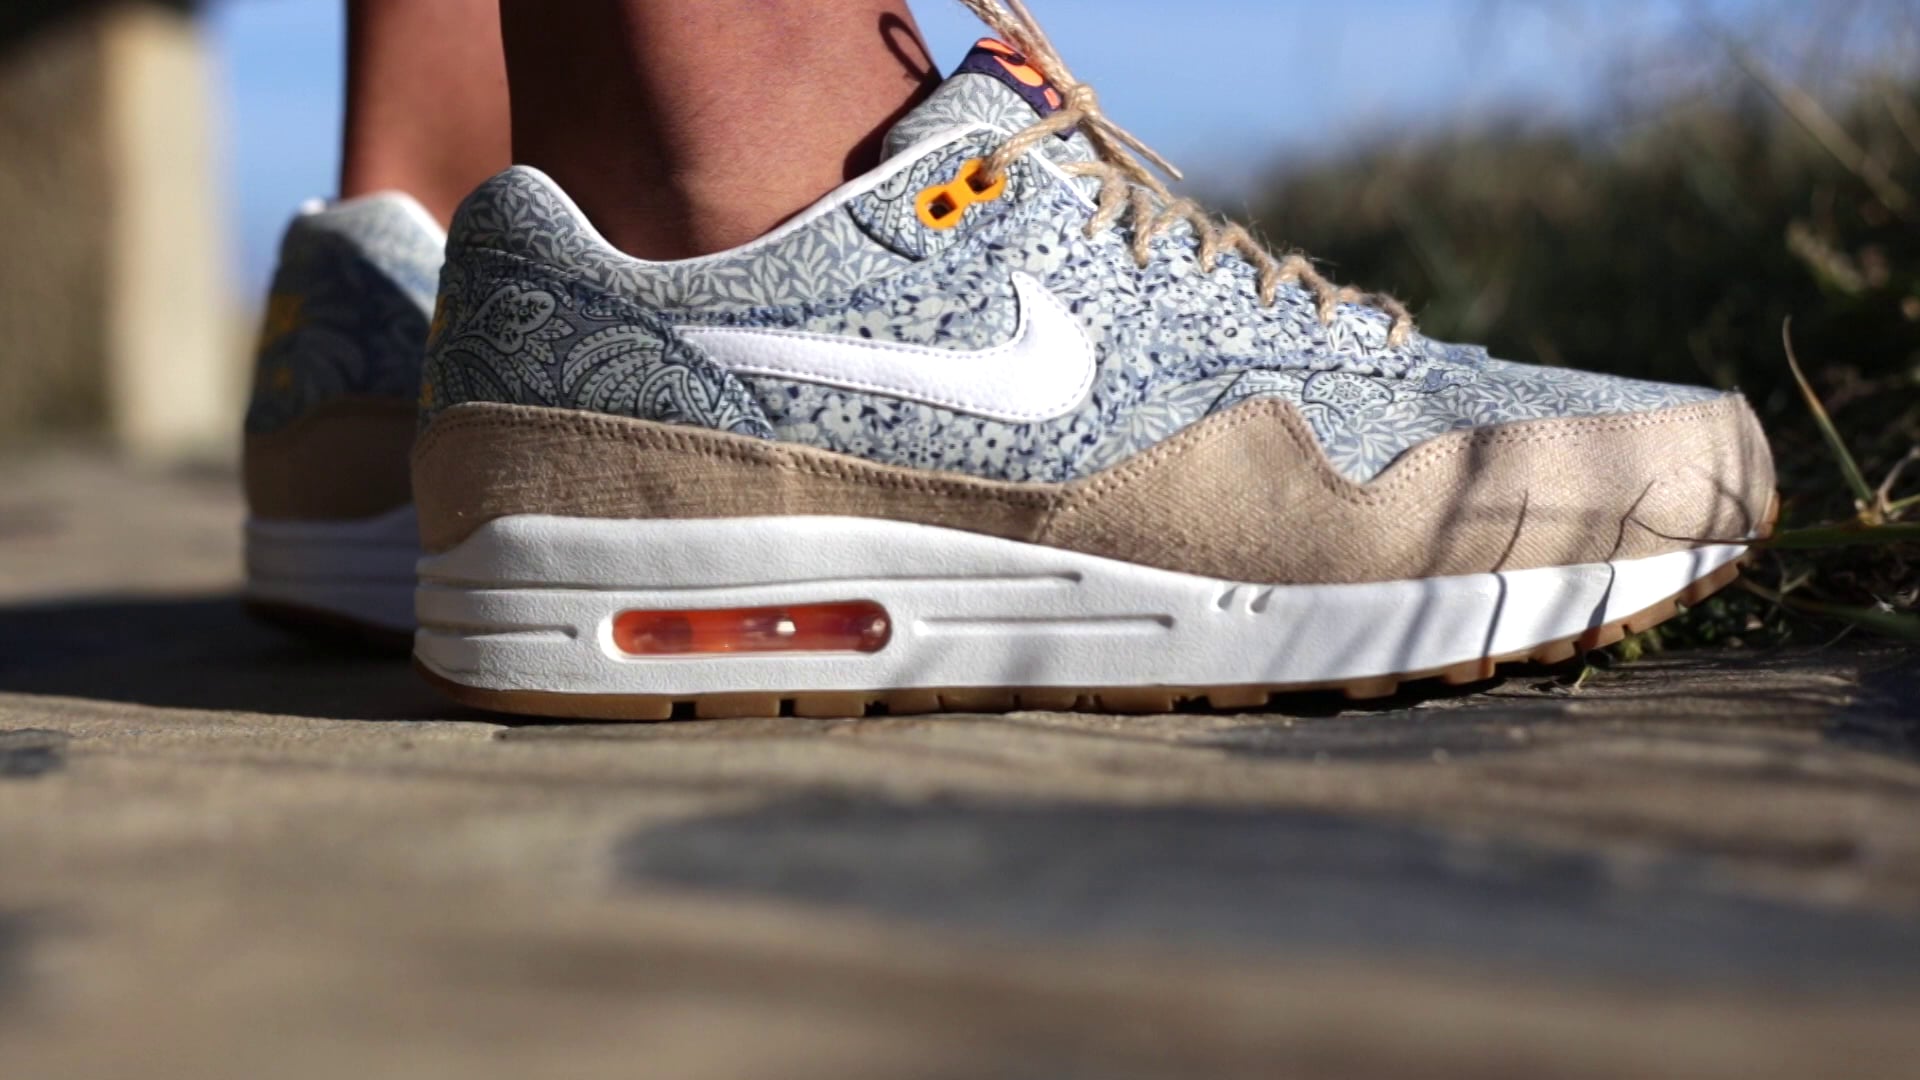 Weiland optioneel duif Nike Air Max 1 x Liberty London by ÆZOT on Vimeo